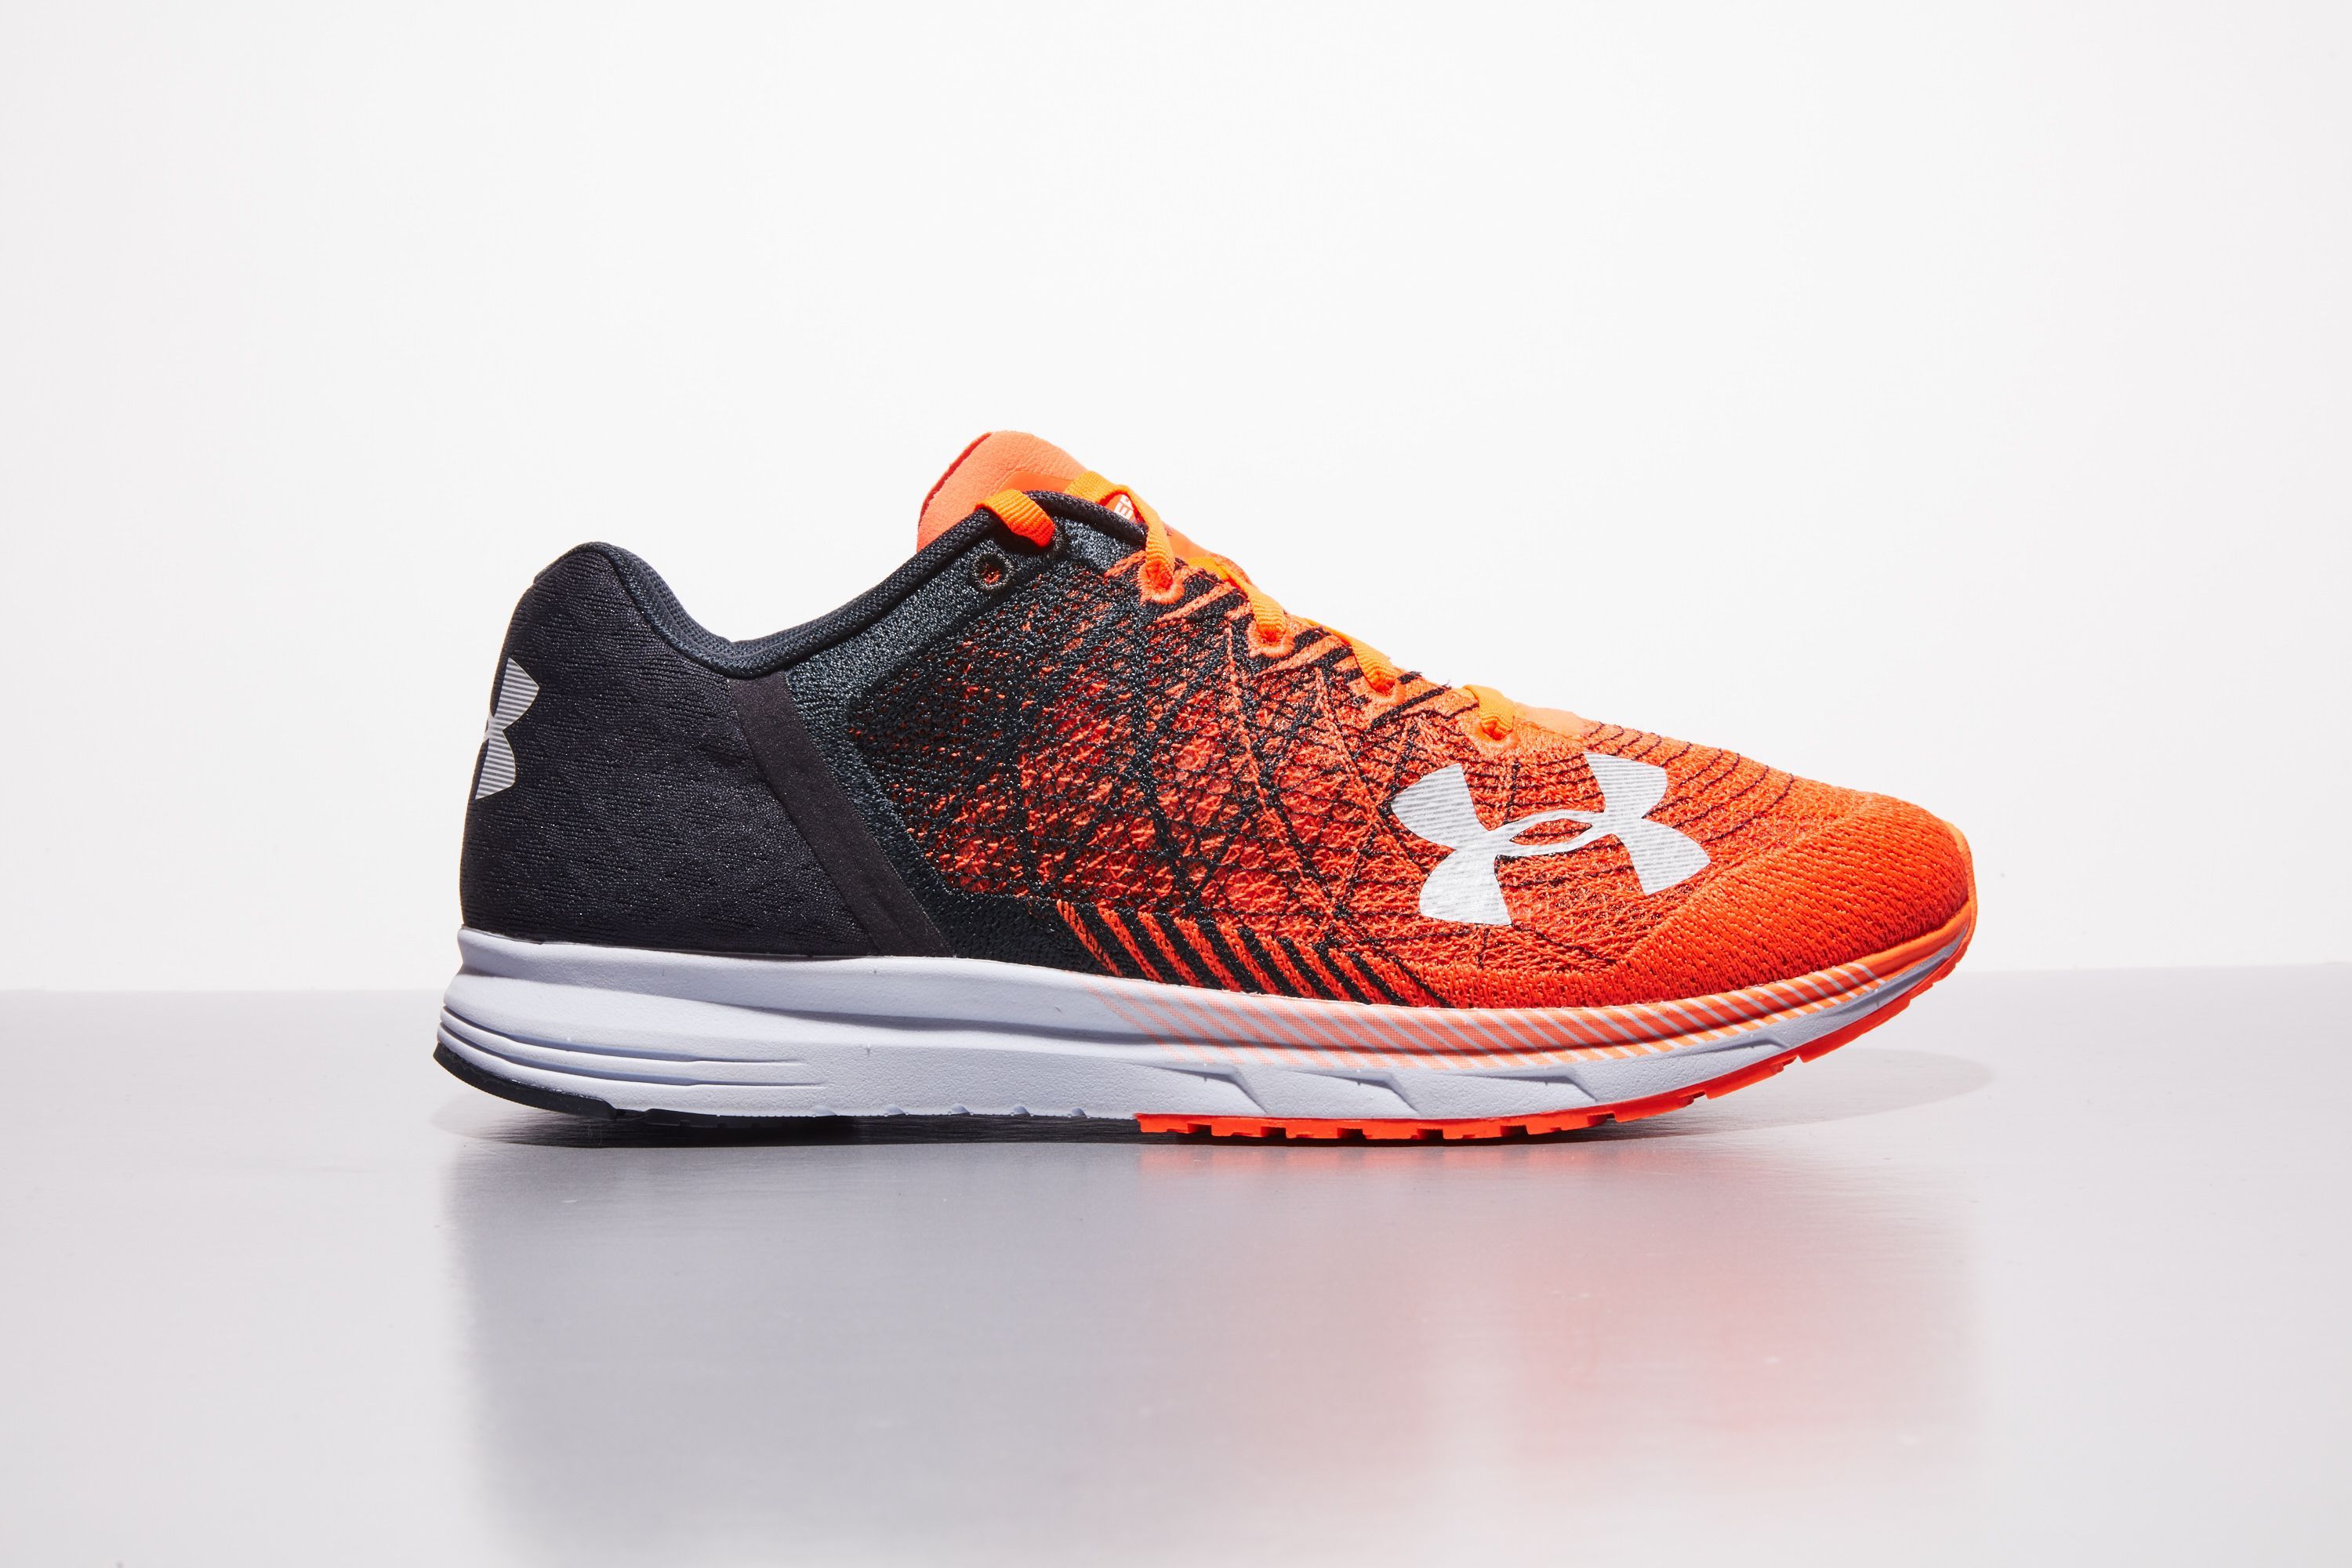 under armour flat shoes